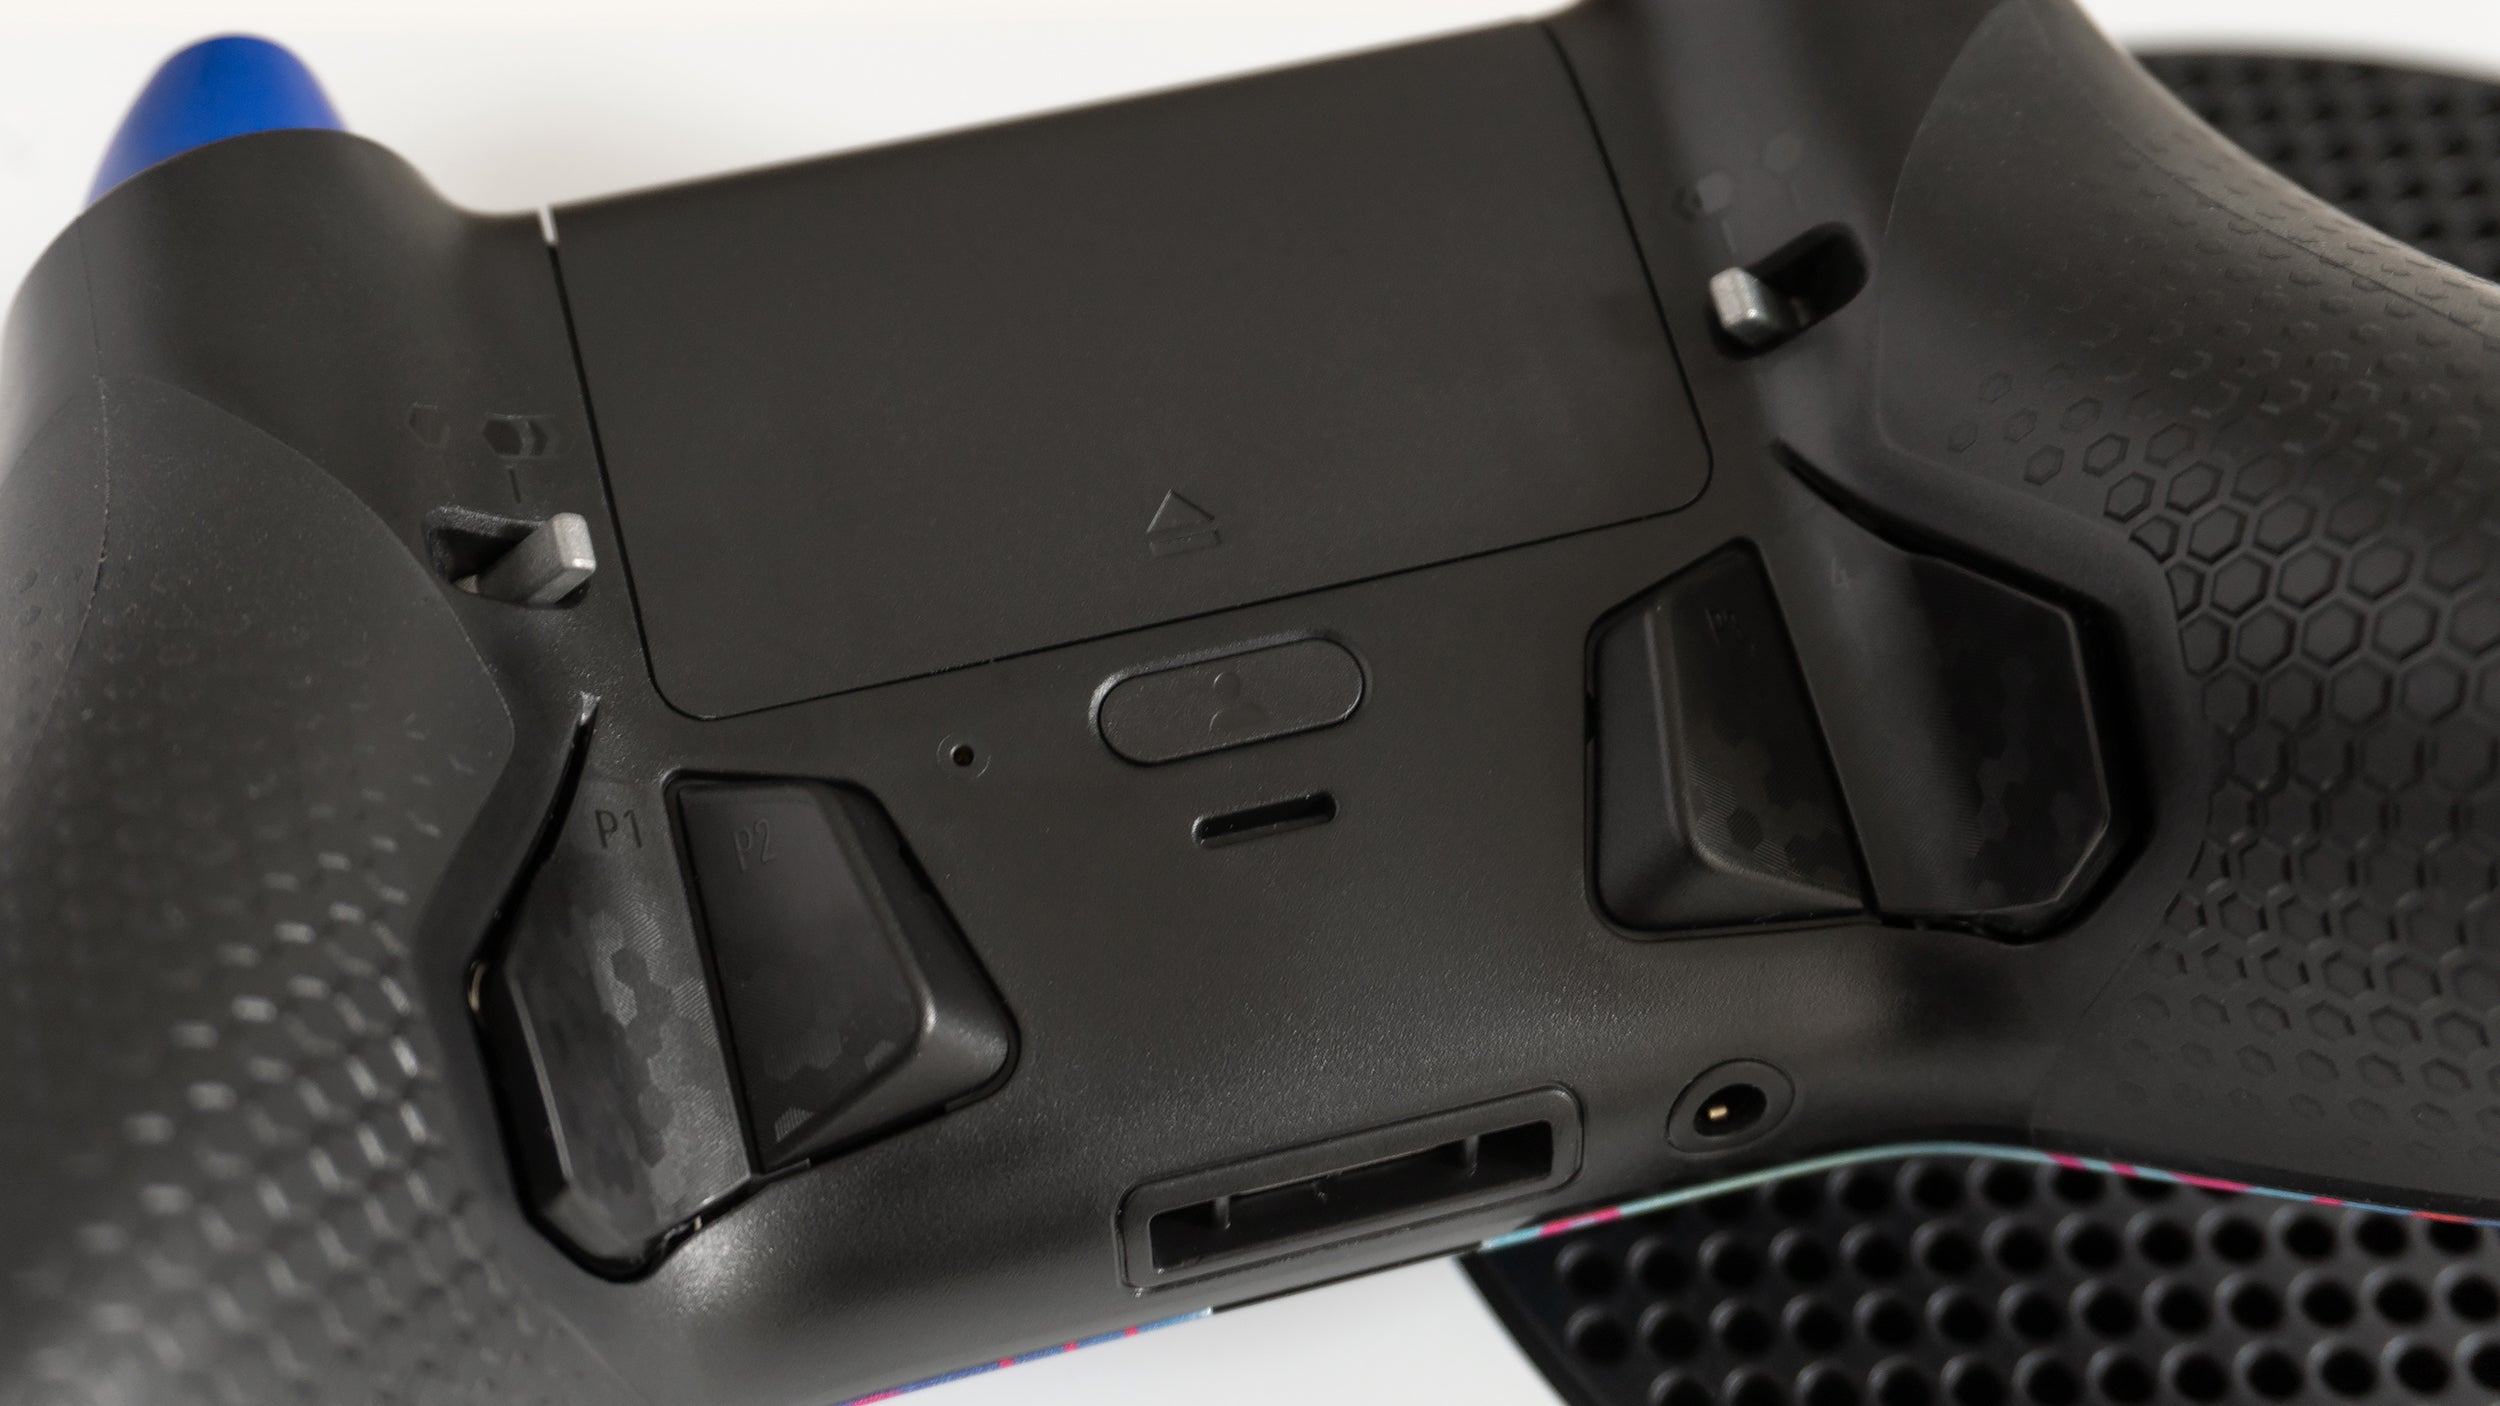 A button on the back of the Scuf Instinct and Instinct Pro replaces the magnetic key that older Scuf controllers relied on for remapping the rear buttons. (Photo: Andrew Liszewski - Gizmodo)